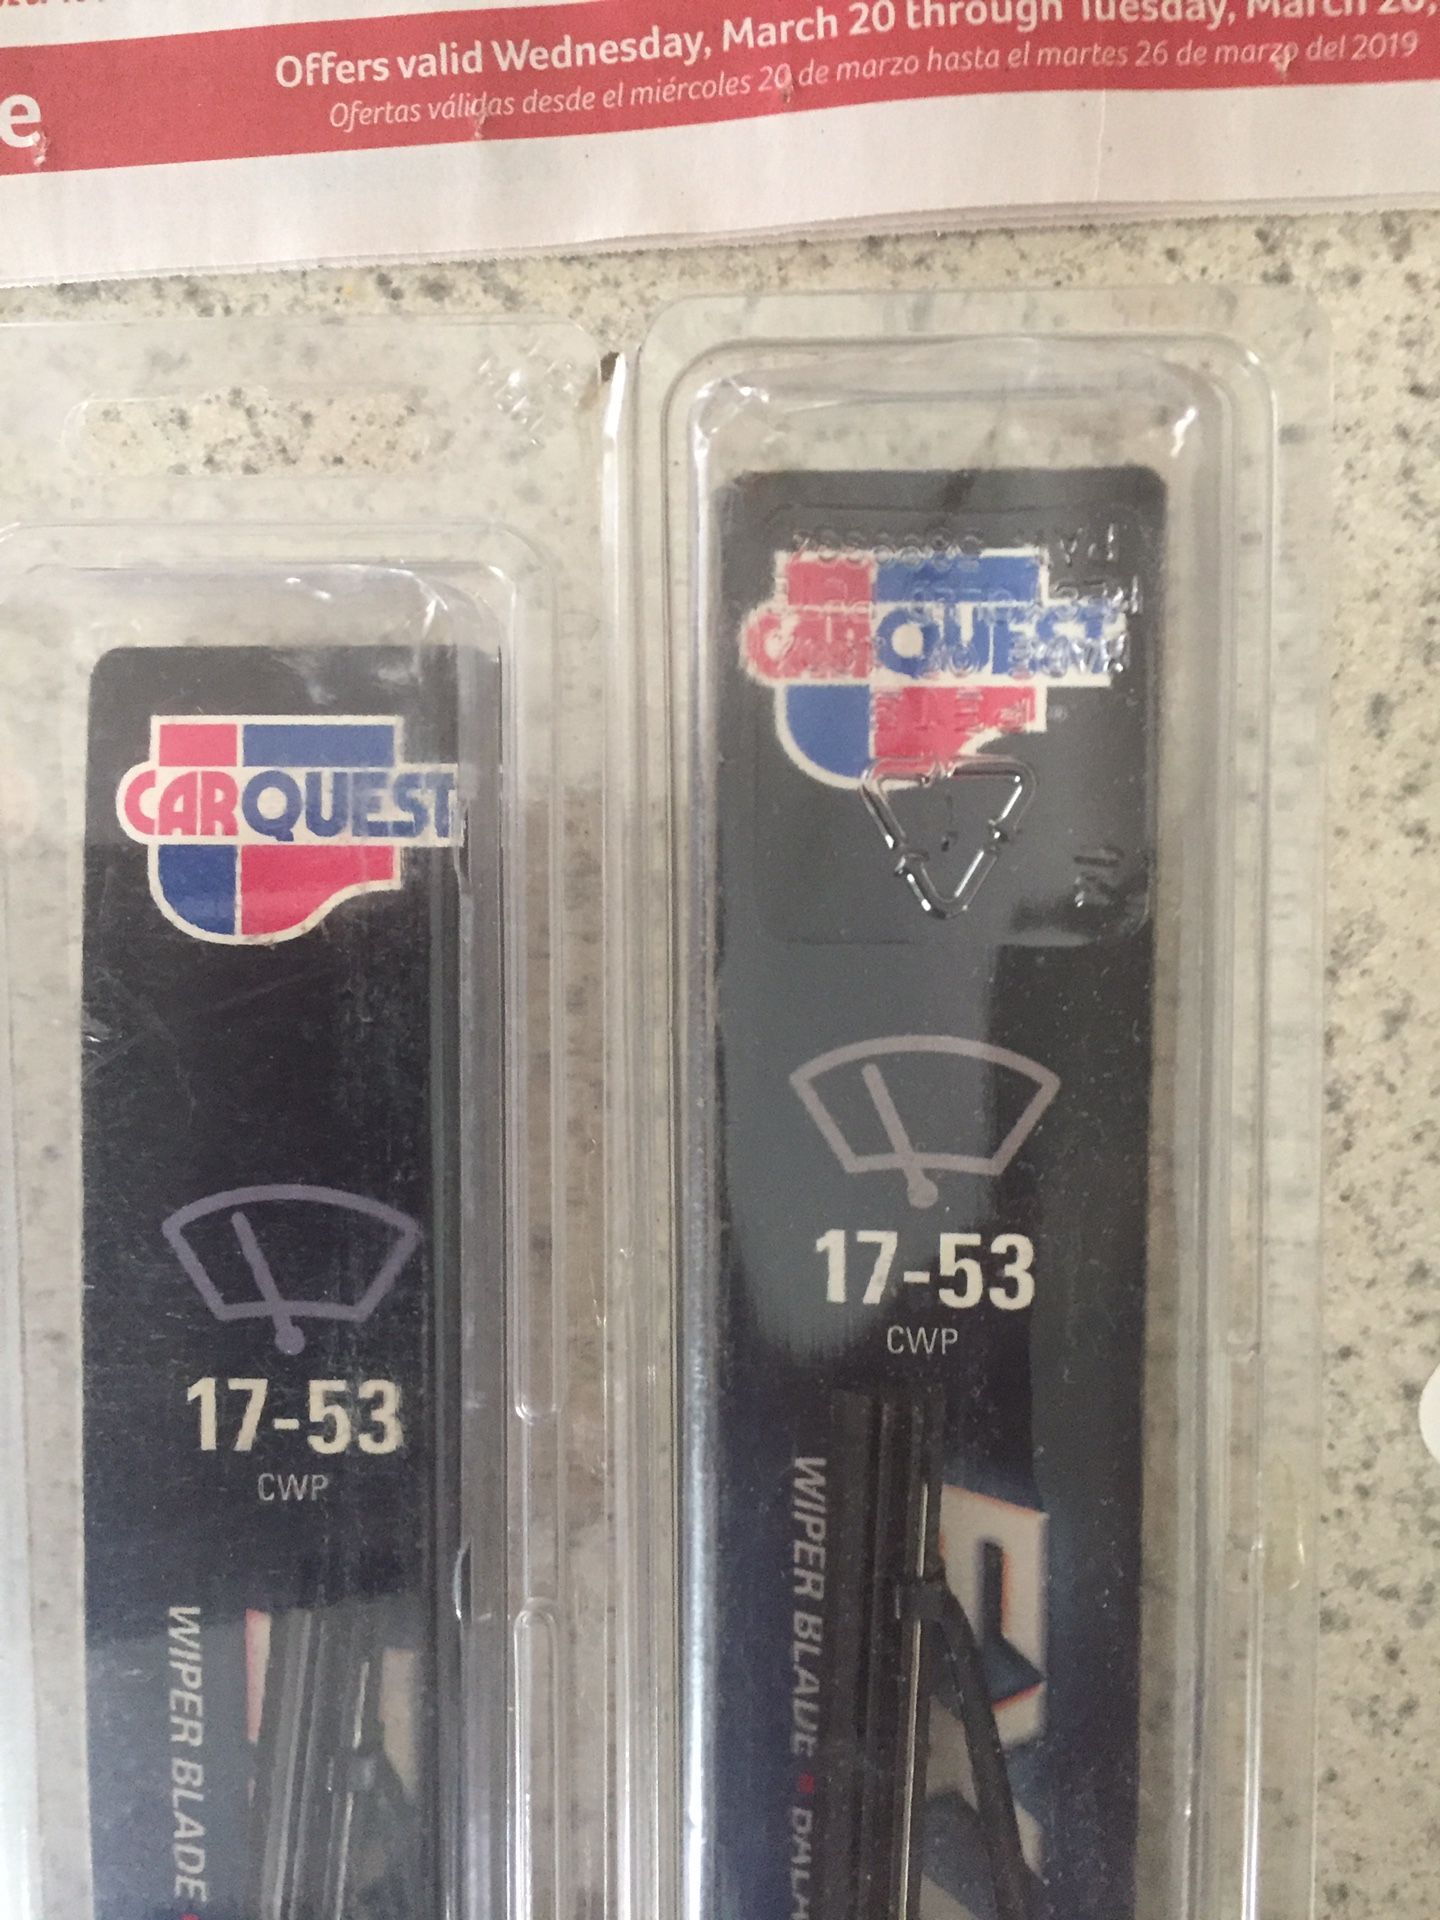 Two car quest windshield wipers new